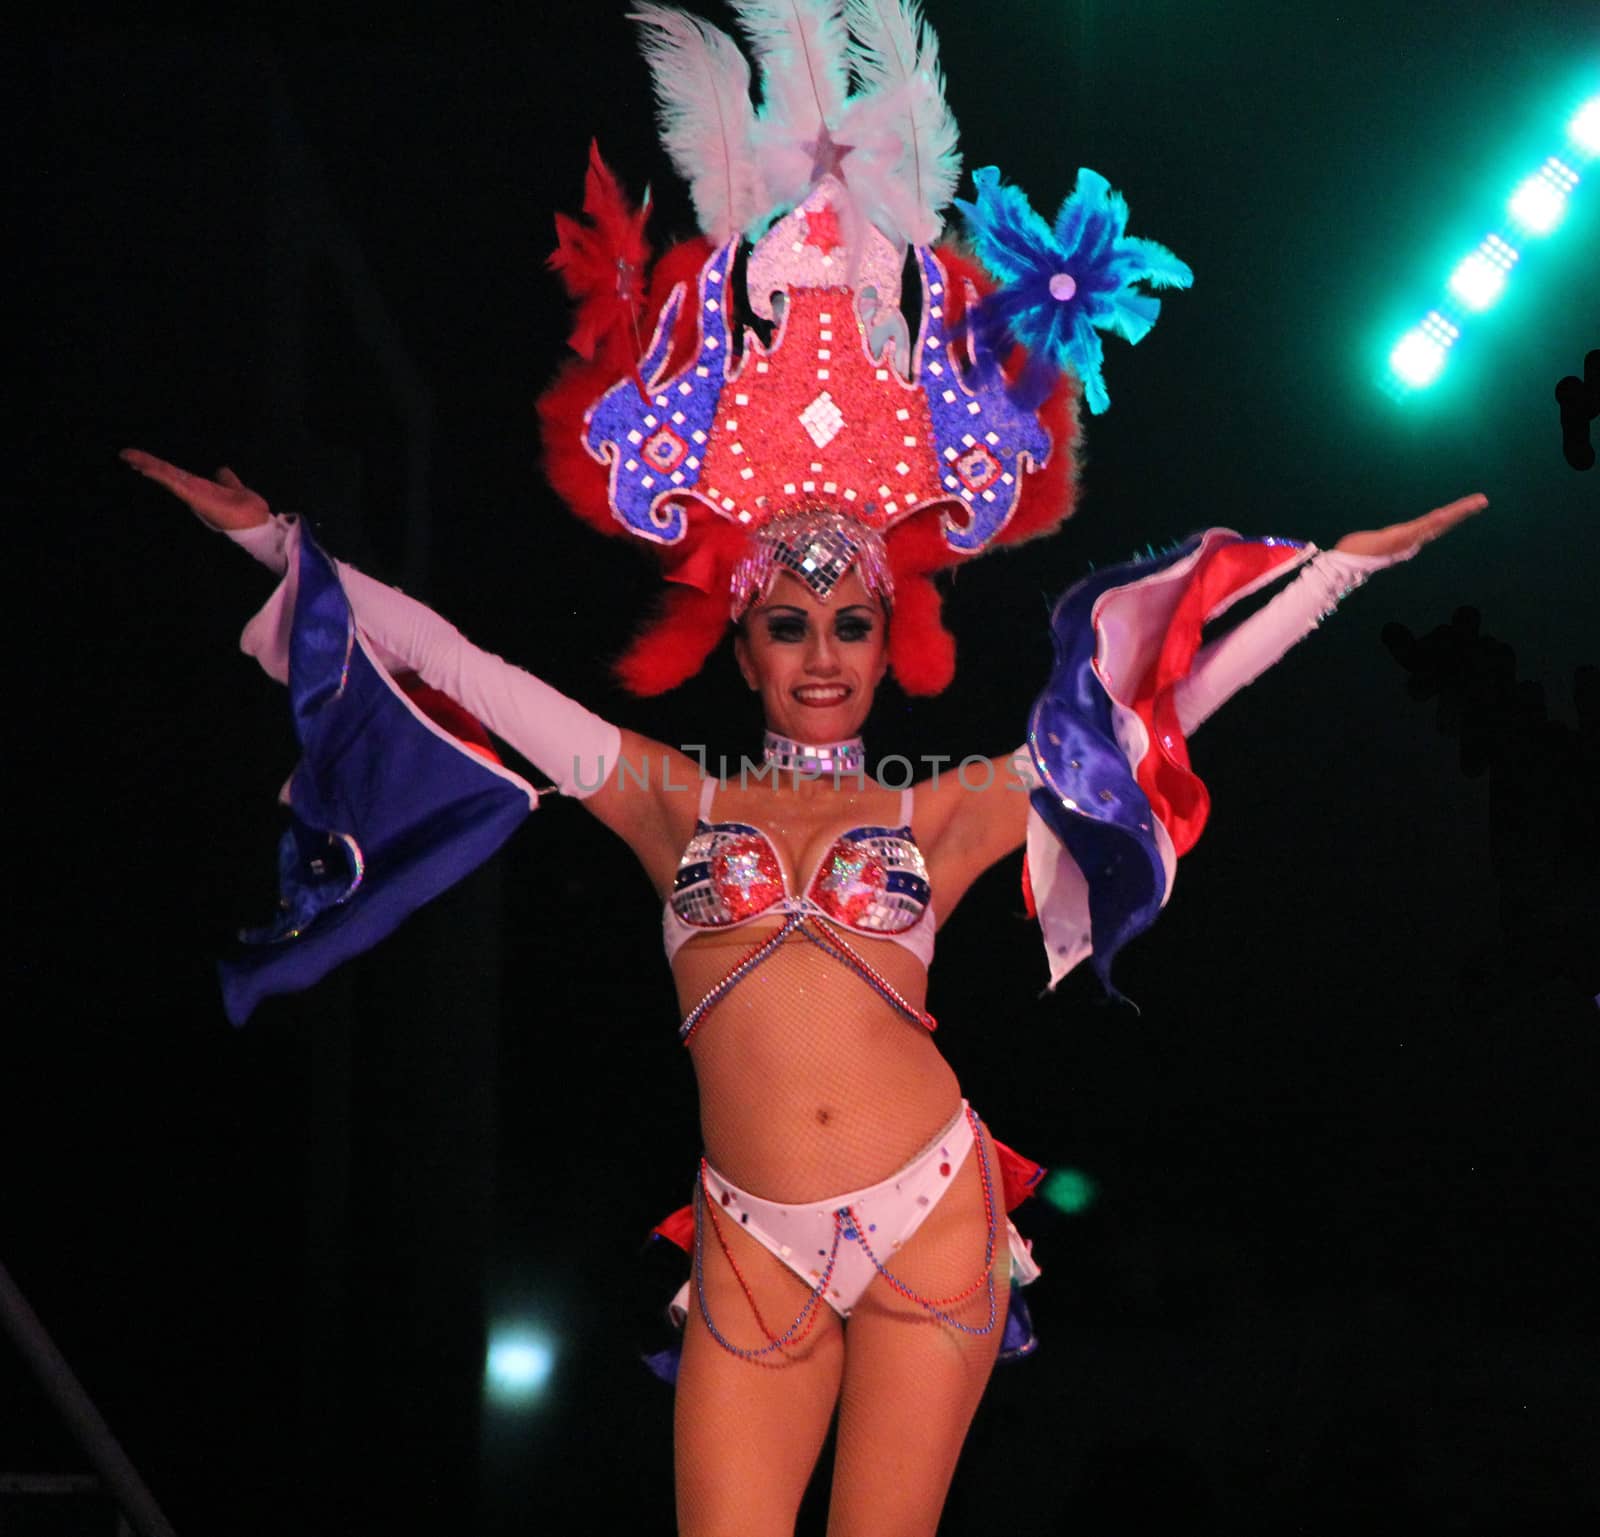 An entertainer performing on stage at a carnaval in Playa del Carmen, Mexico 10 Feb 2013 No model release Editorial only